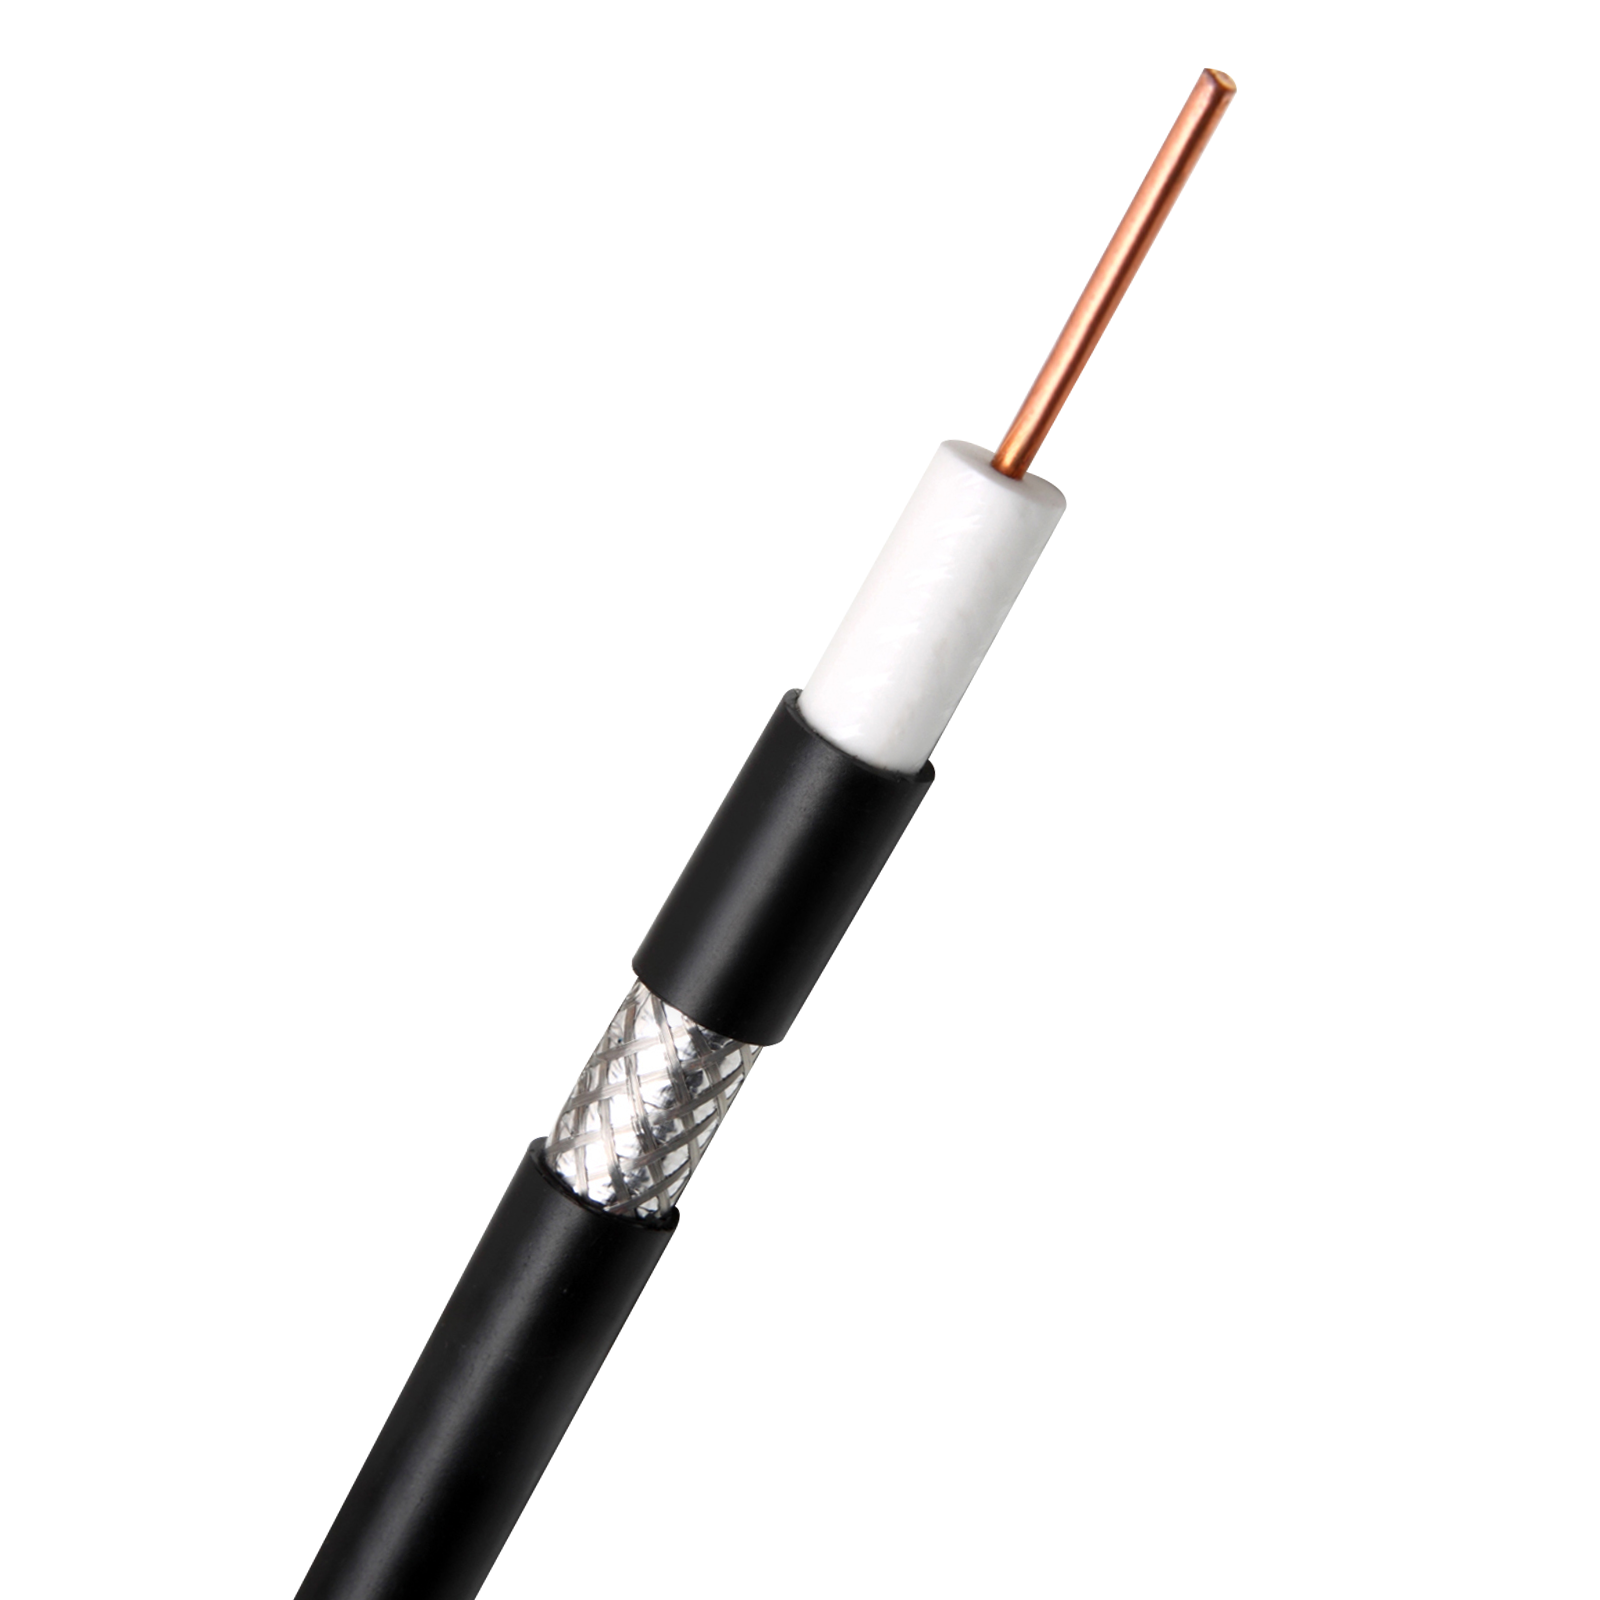 High-Quality RG11 Coaxial Cable by Aston Cable - Leading Manufacturer and Supplier